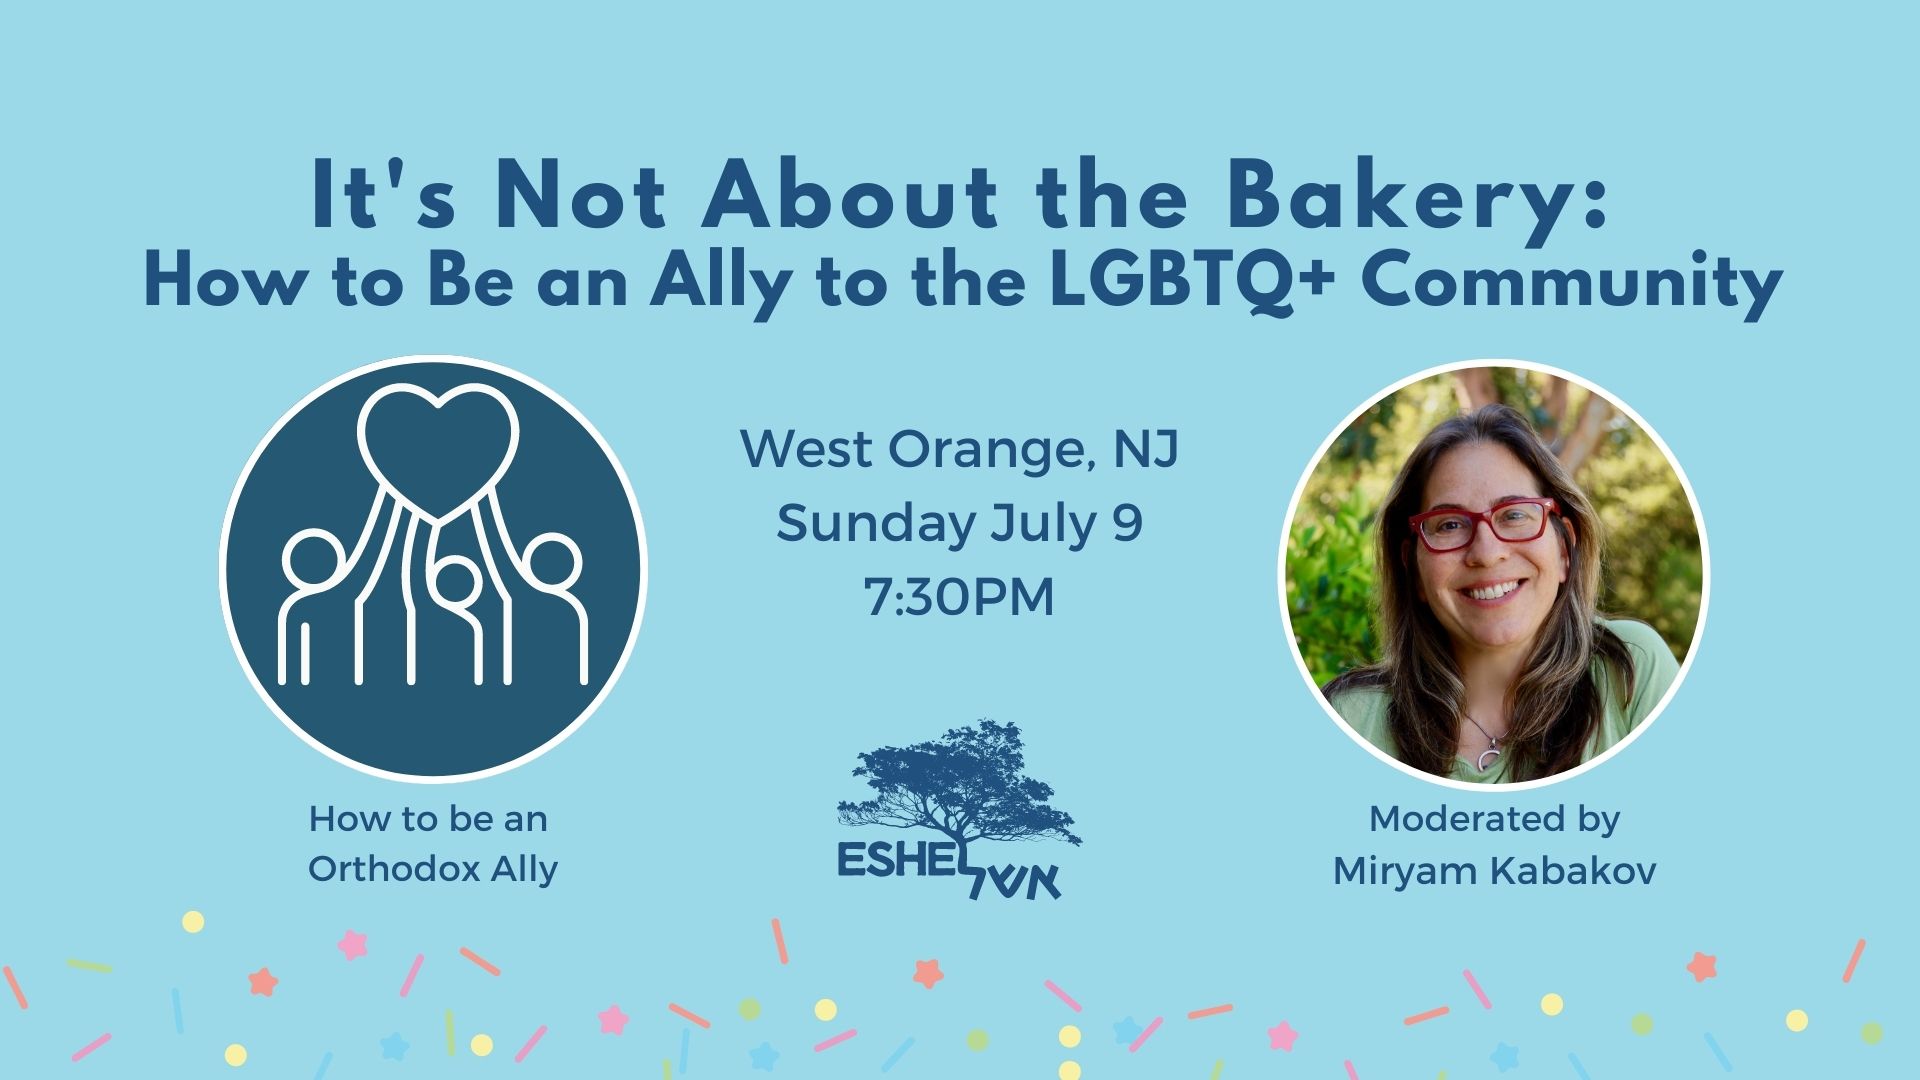 It's Not About the Bakery: How to Be An Ally to the LGBTQ+ Community | West Orange, NJ, Sunday July 9 @ 7:30 pm